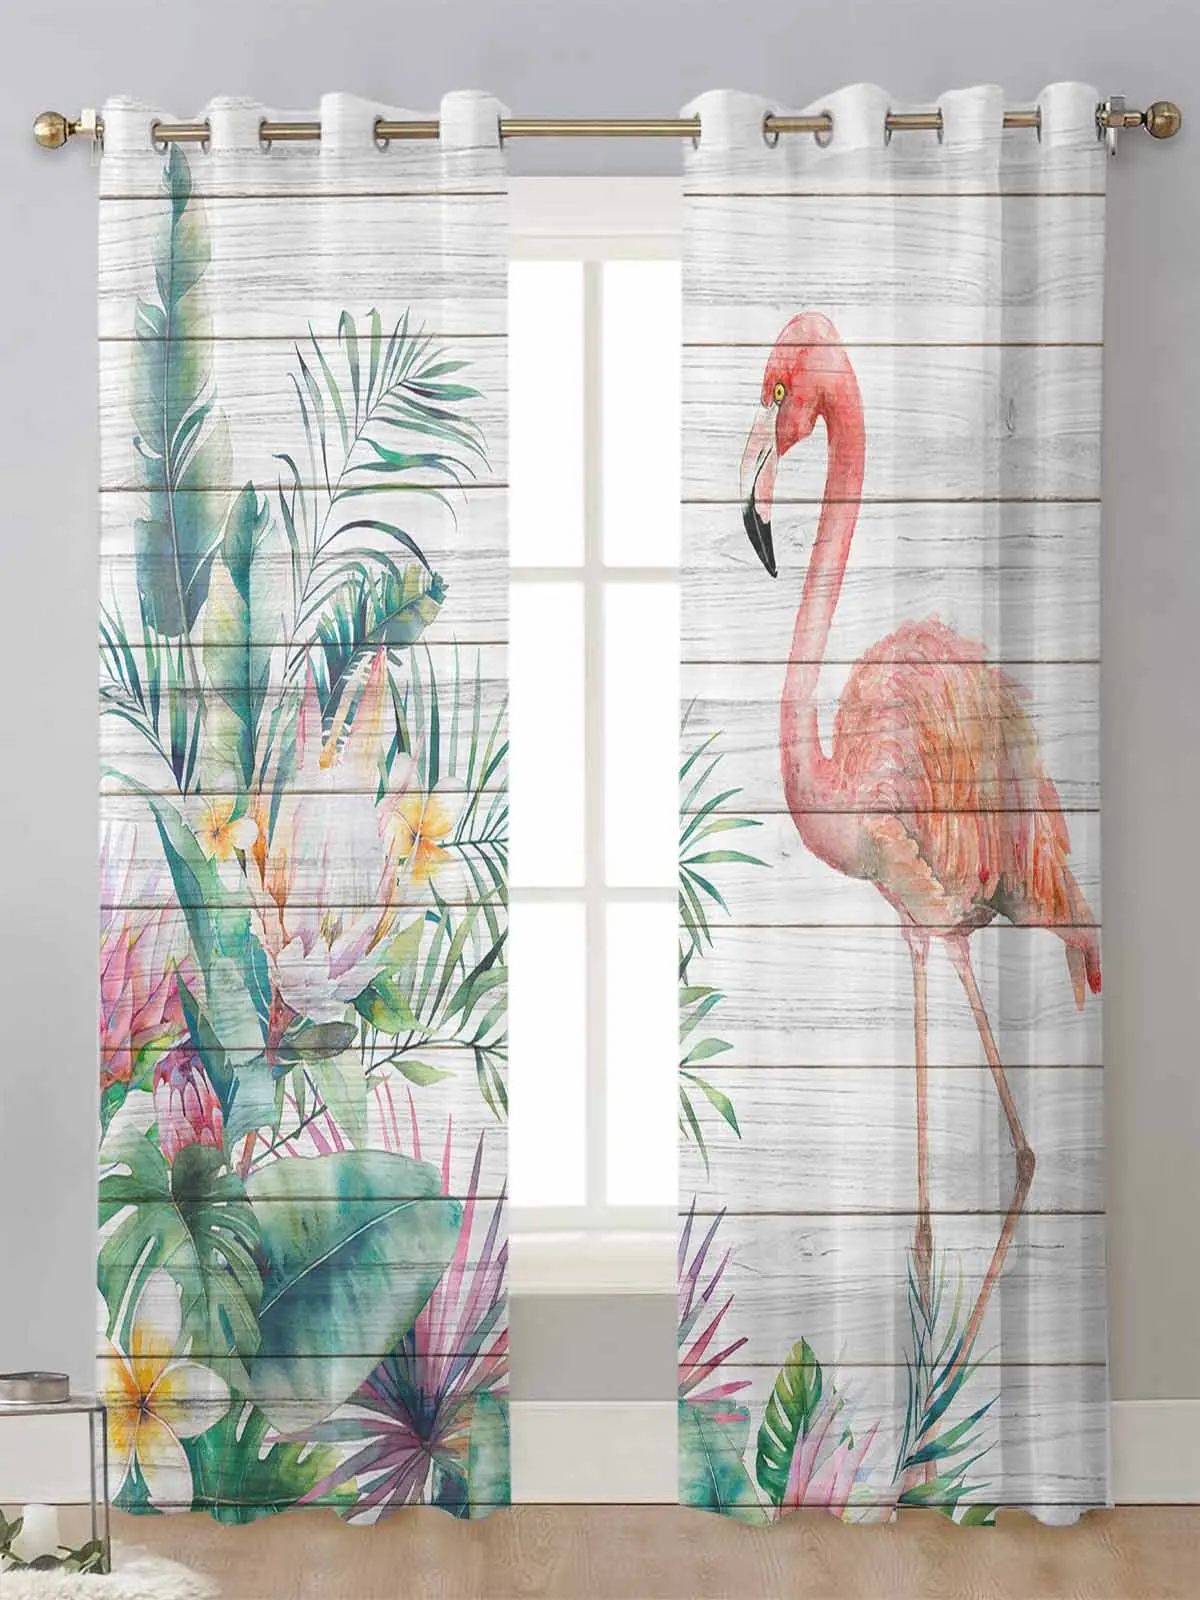 

Flamingo Tropical Plant Wood Sheer Curtains For Living Room Window Transparent Voile Tulle Curtain Cortinas Drapes Home Decor